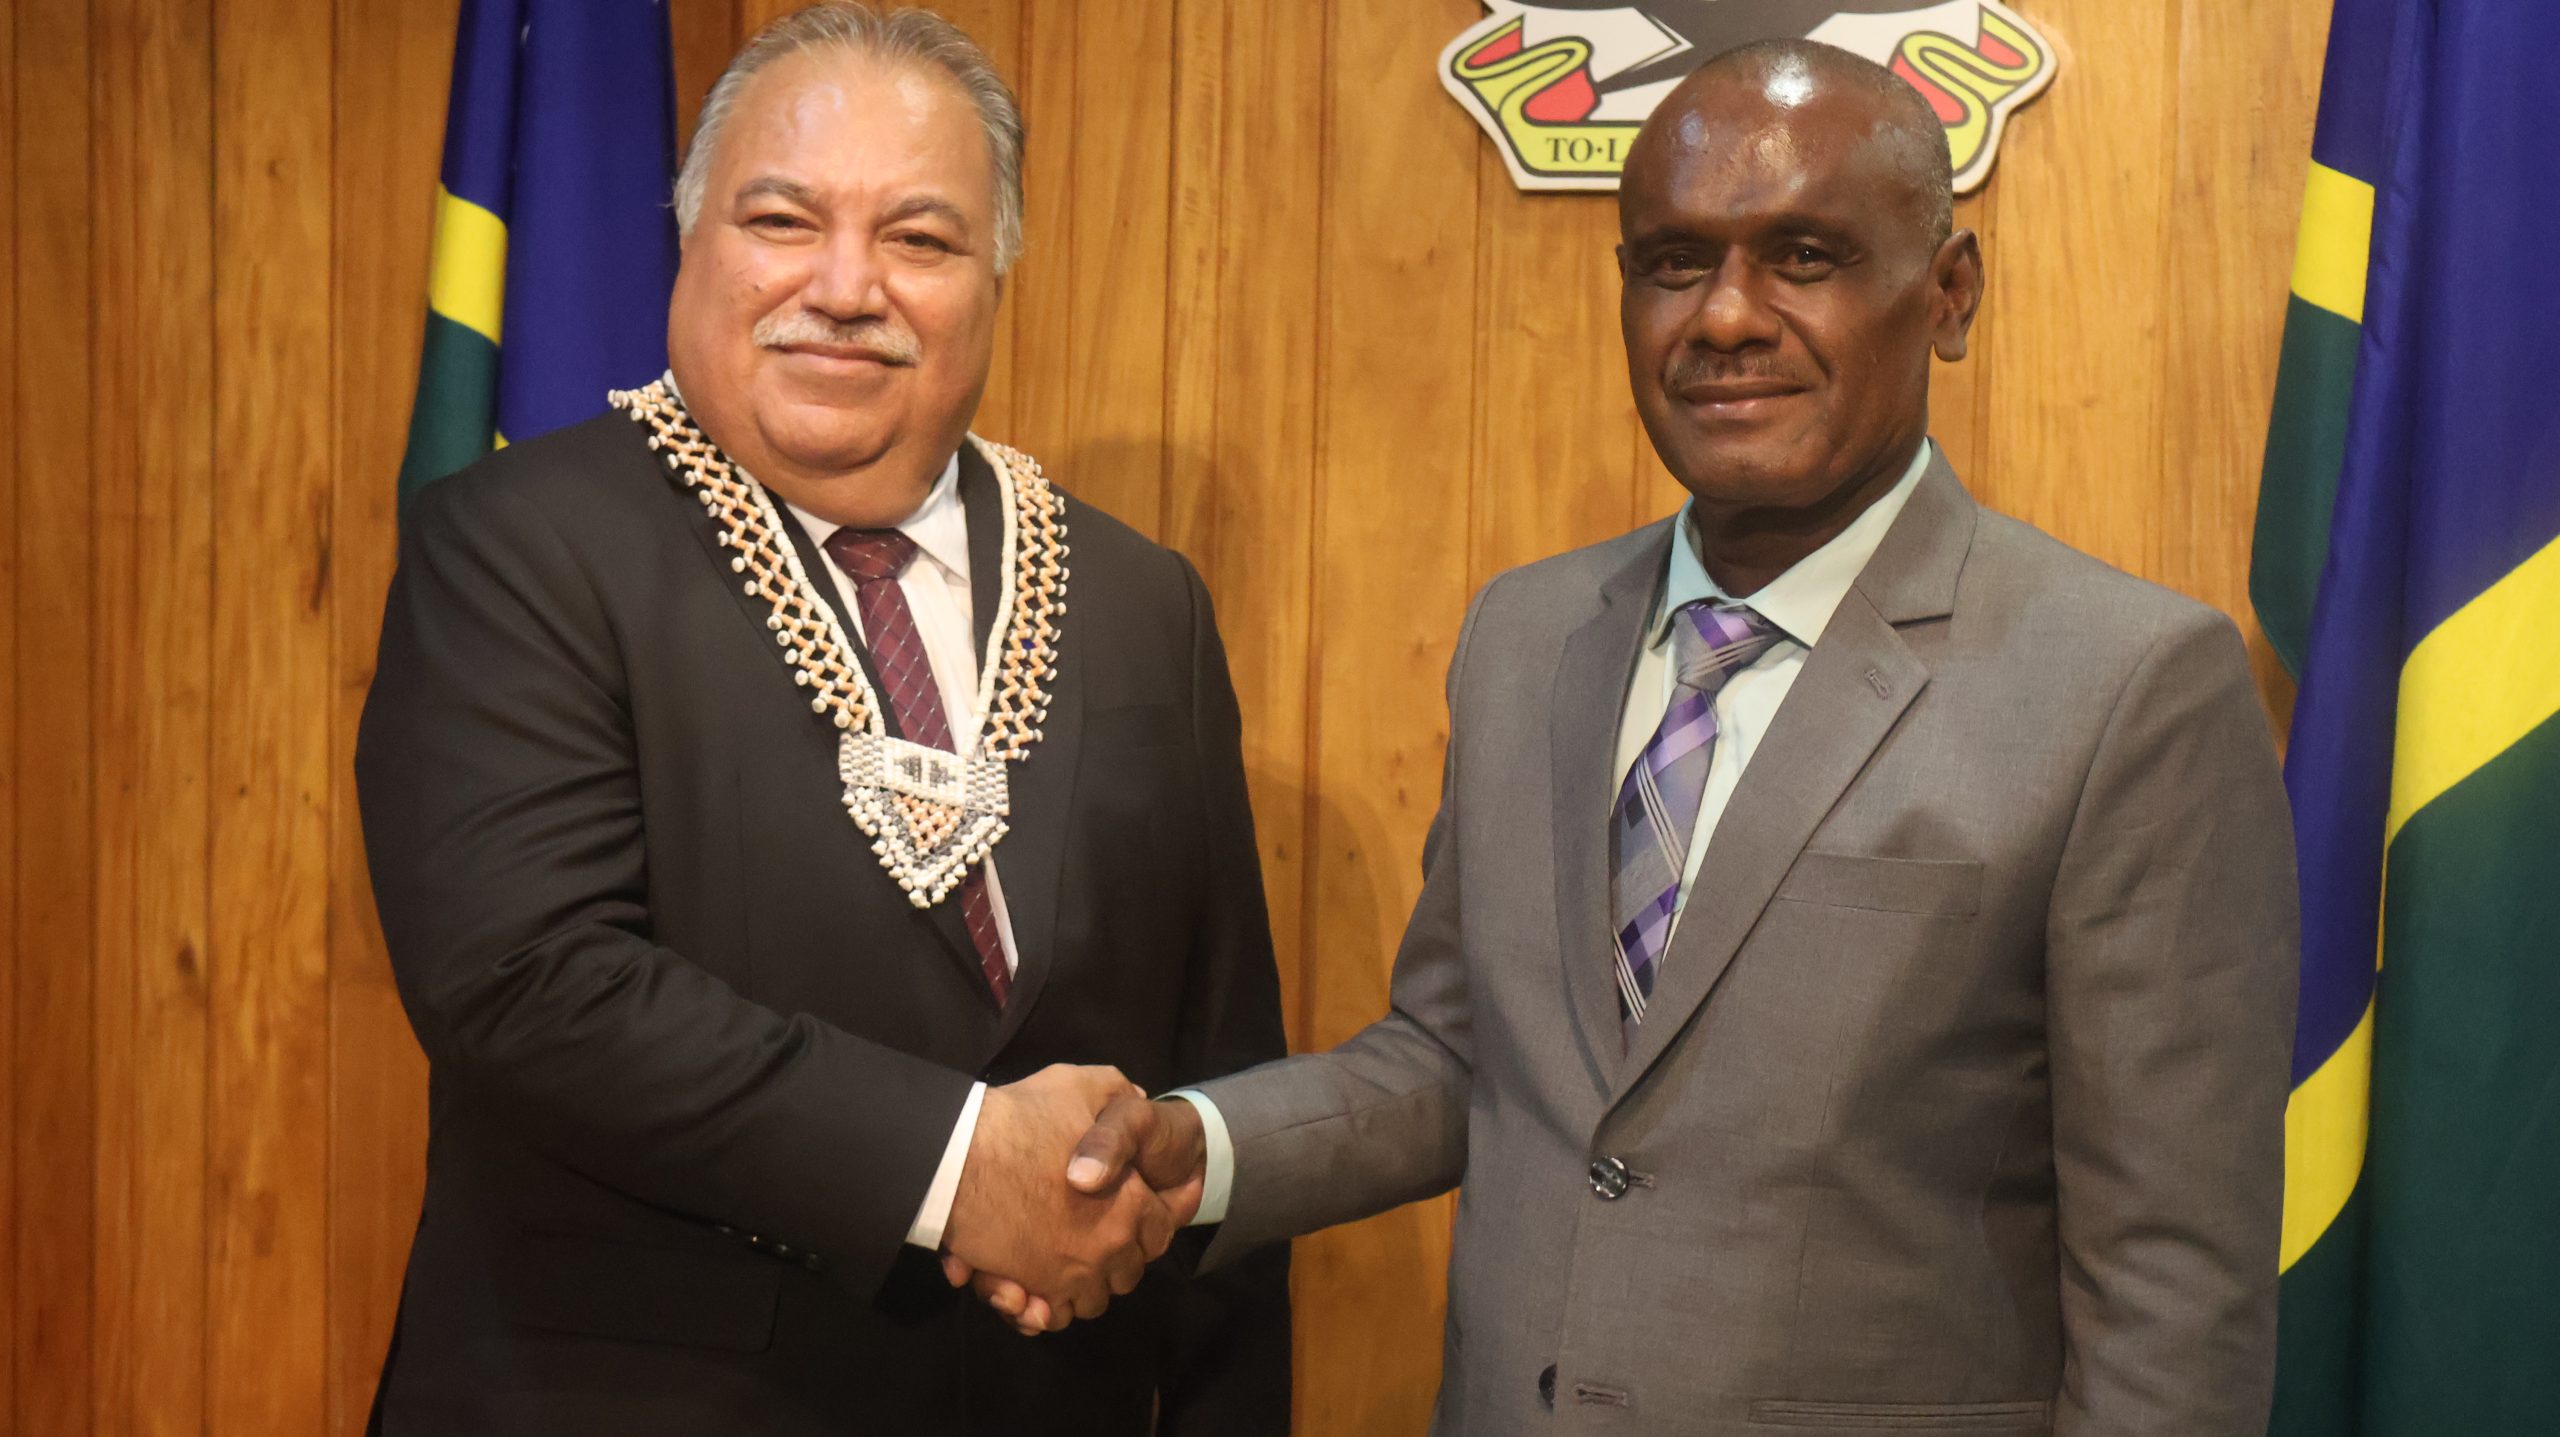 PM MANELE ACKNOWLEDGED PIF’S OBSERVER ROLE IN THE RECENT JOINT ELECTIONS